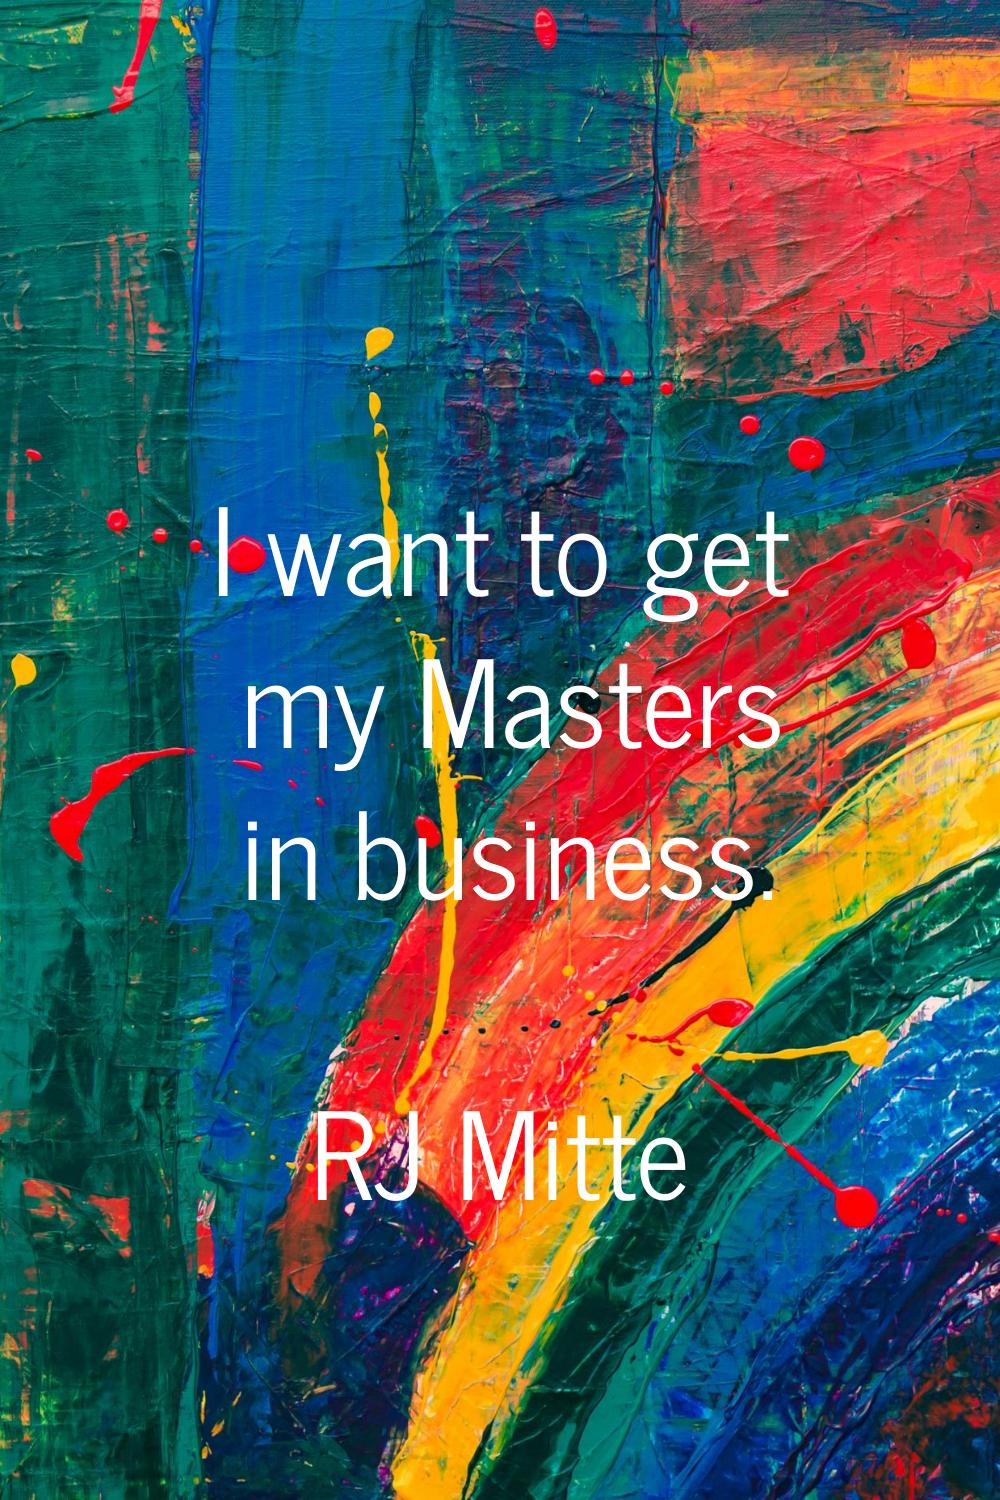 I want to get my Masters in business.